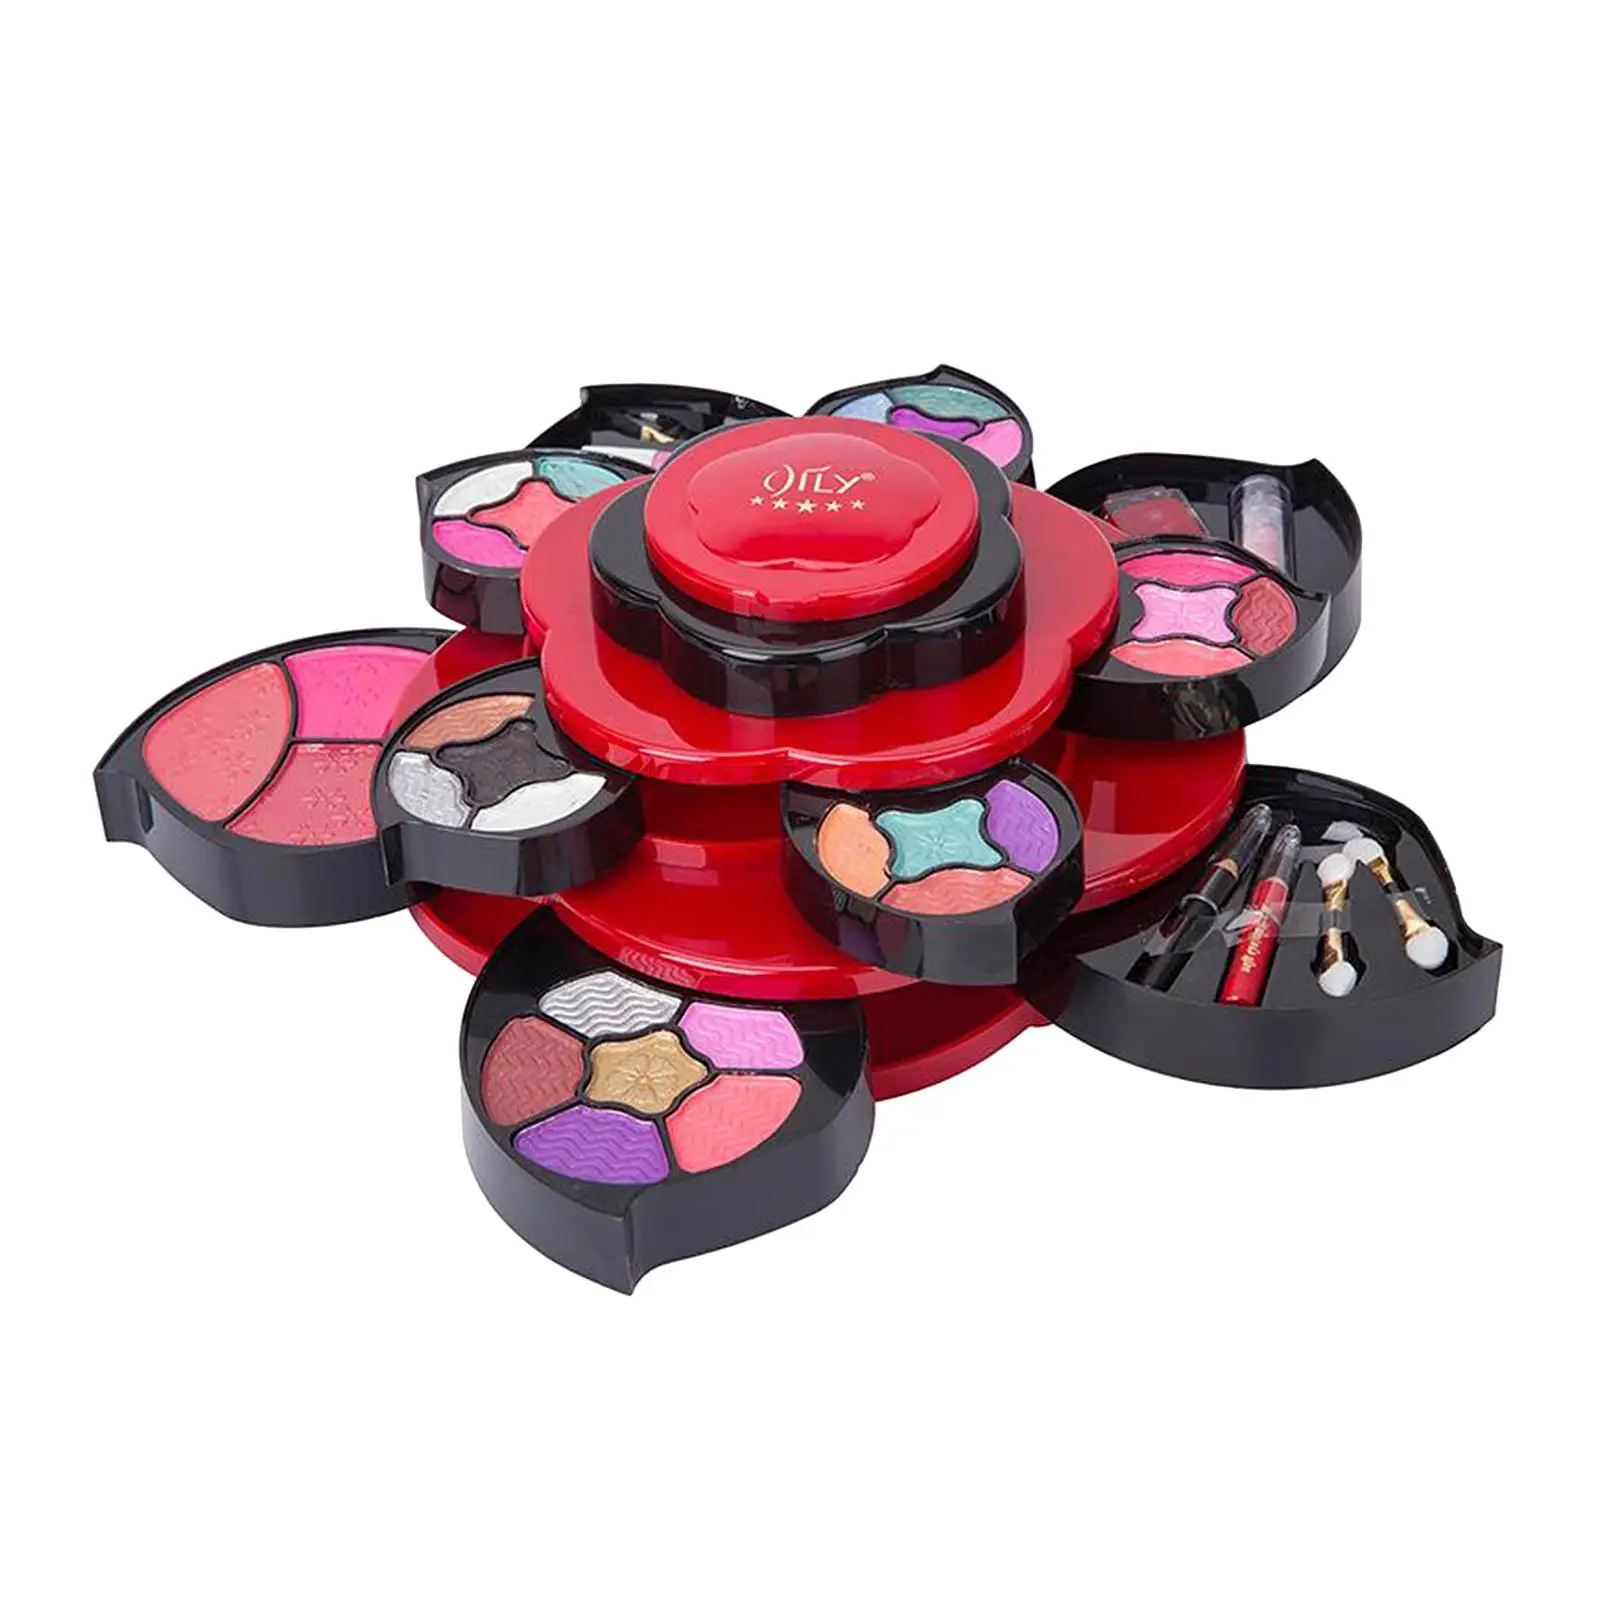 Exclusive Makeup Kits for Teens Flower Make Up Pallete Set for Girls Cosplay